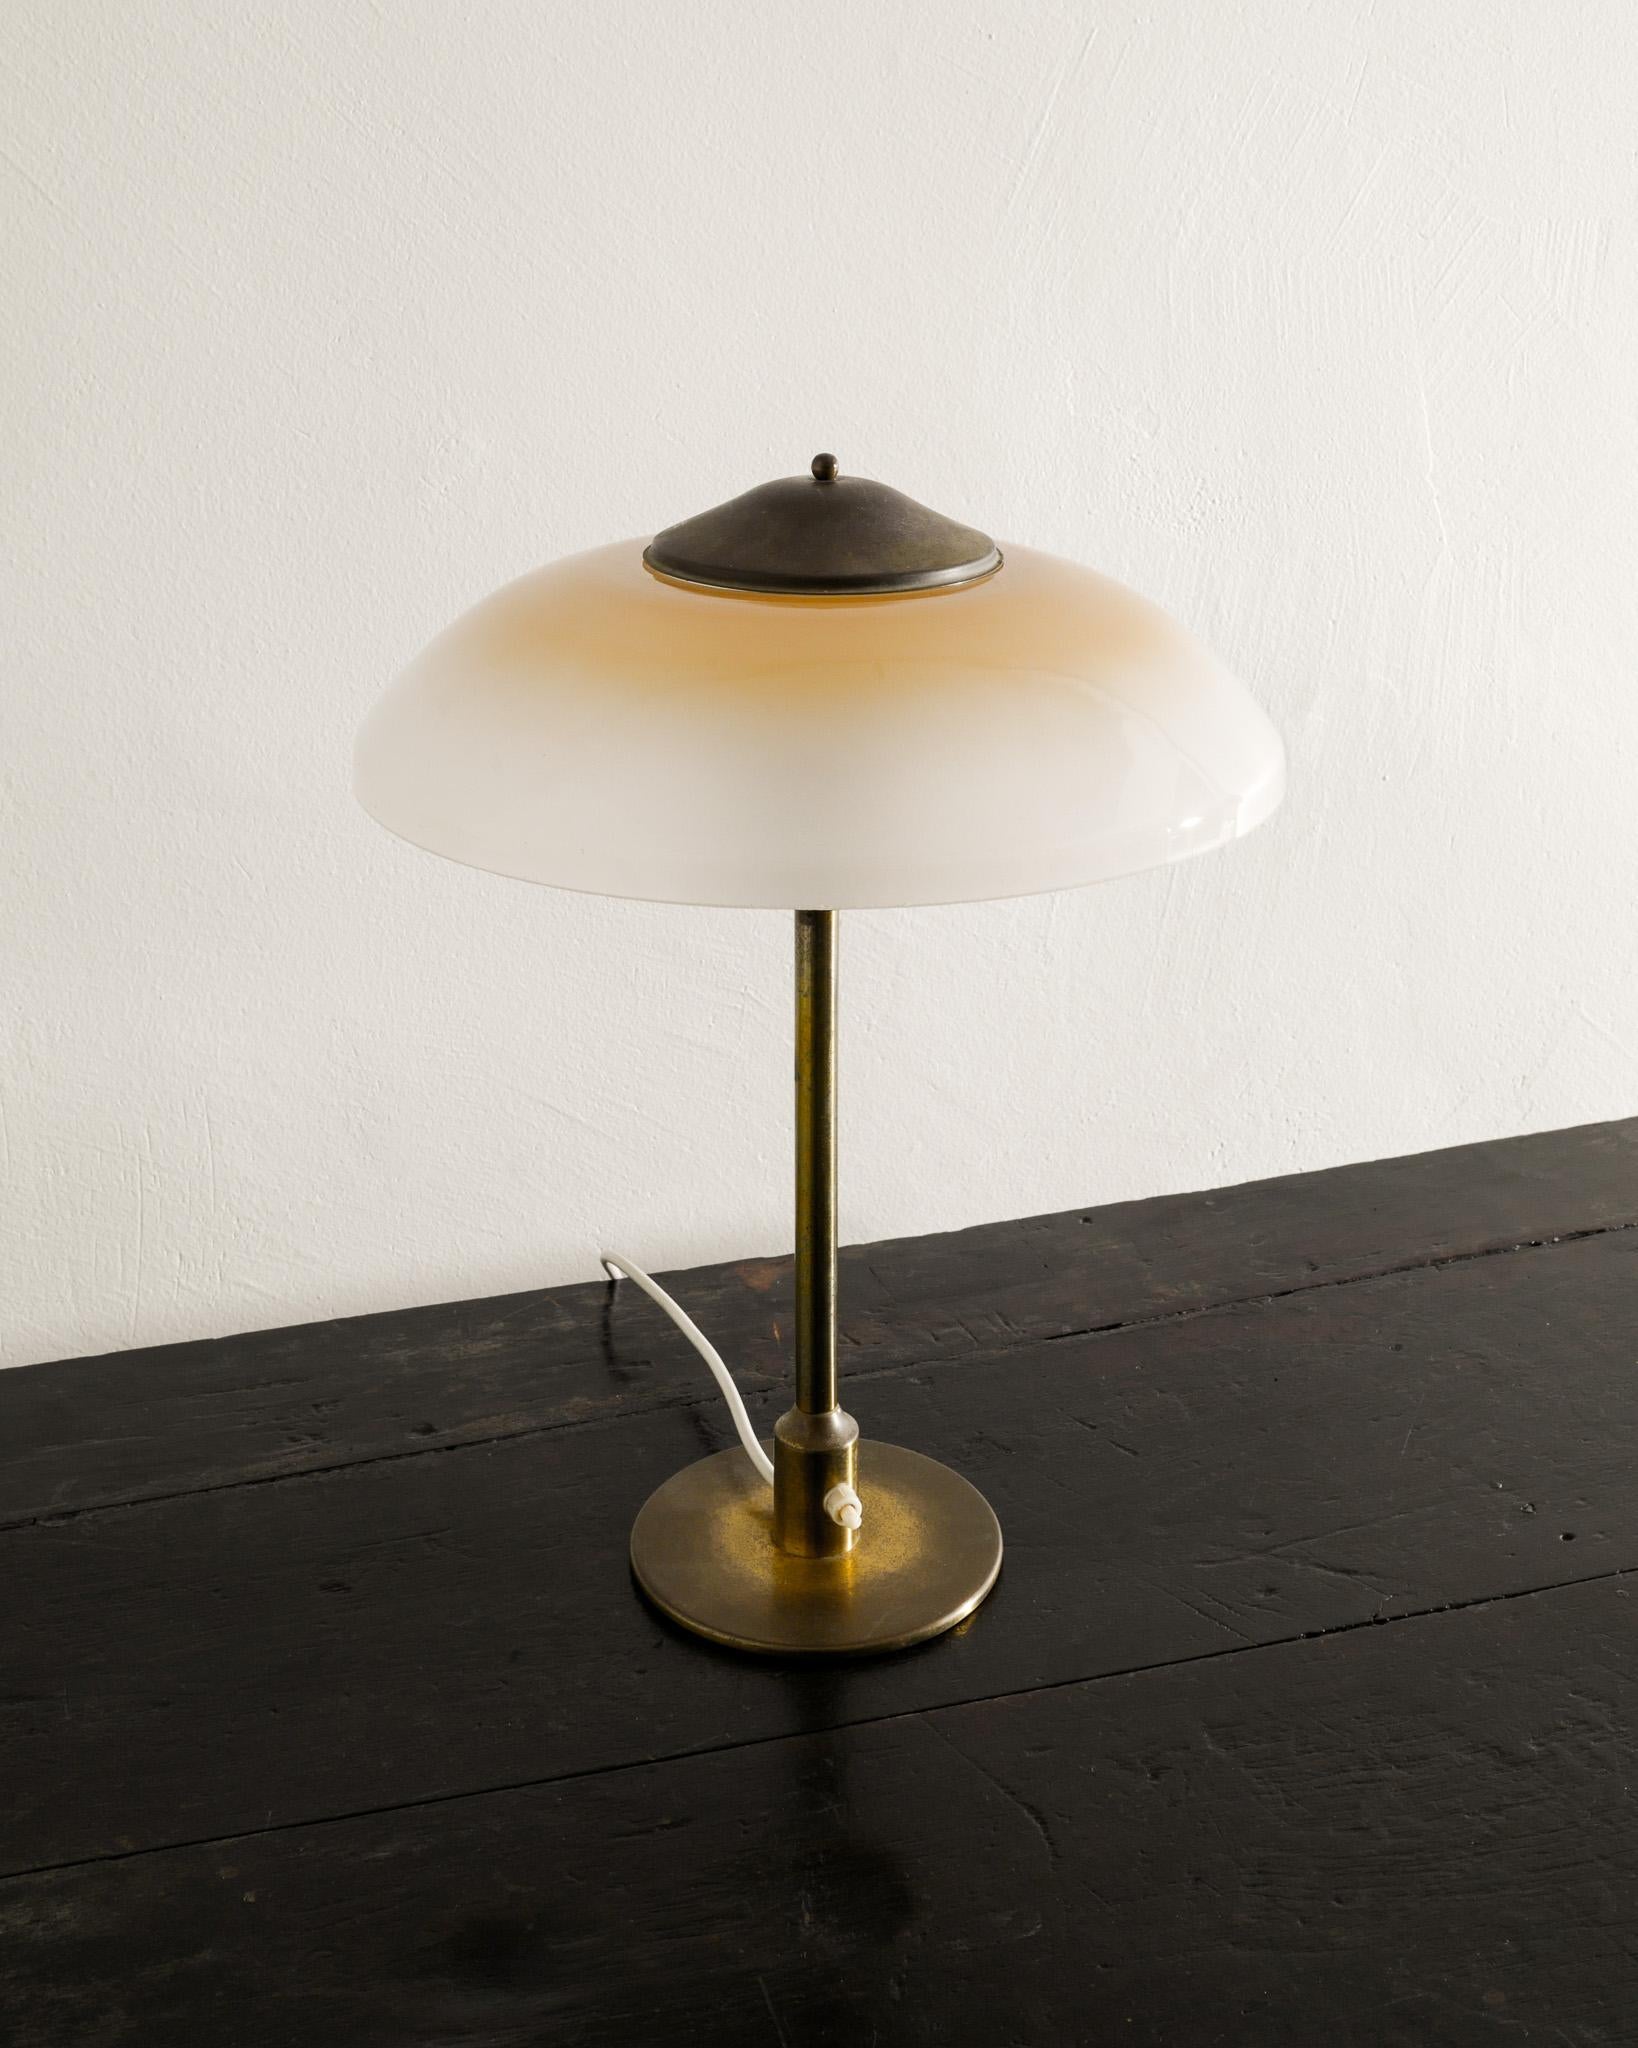 Rare Danish mid century desk / table lamp in patinated brass and frosted opaline glass shade produced by Fog & Mørup Denmark 1950s. In good working and original condition. 

Dimensions: H: 40 cm / 15.75